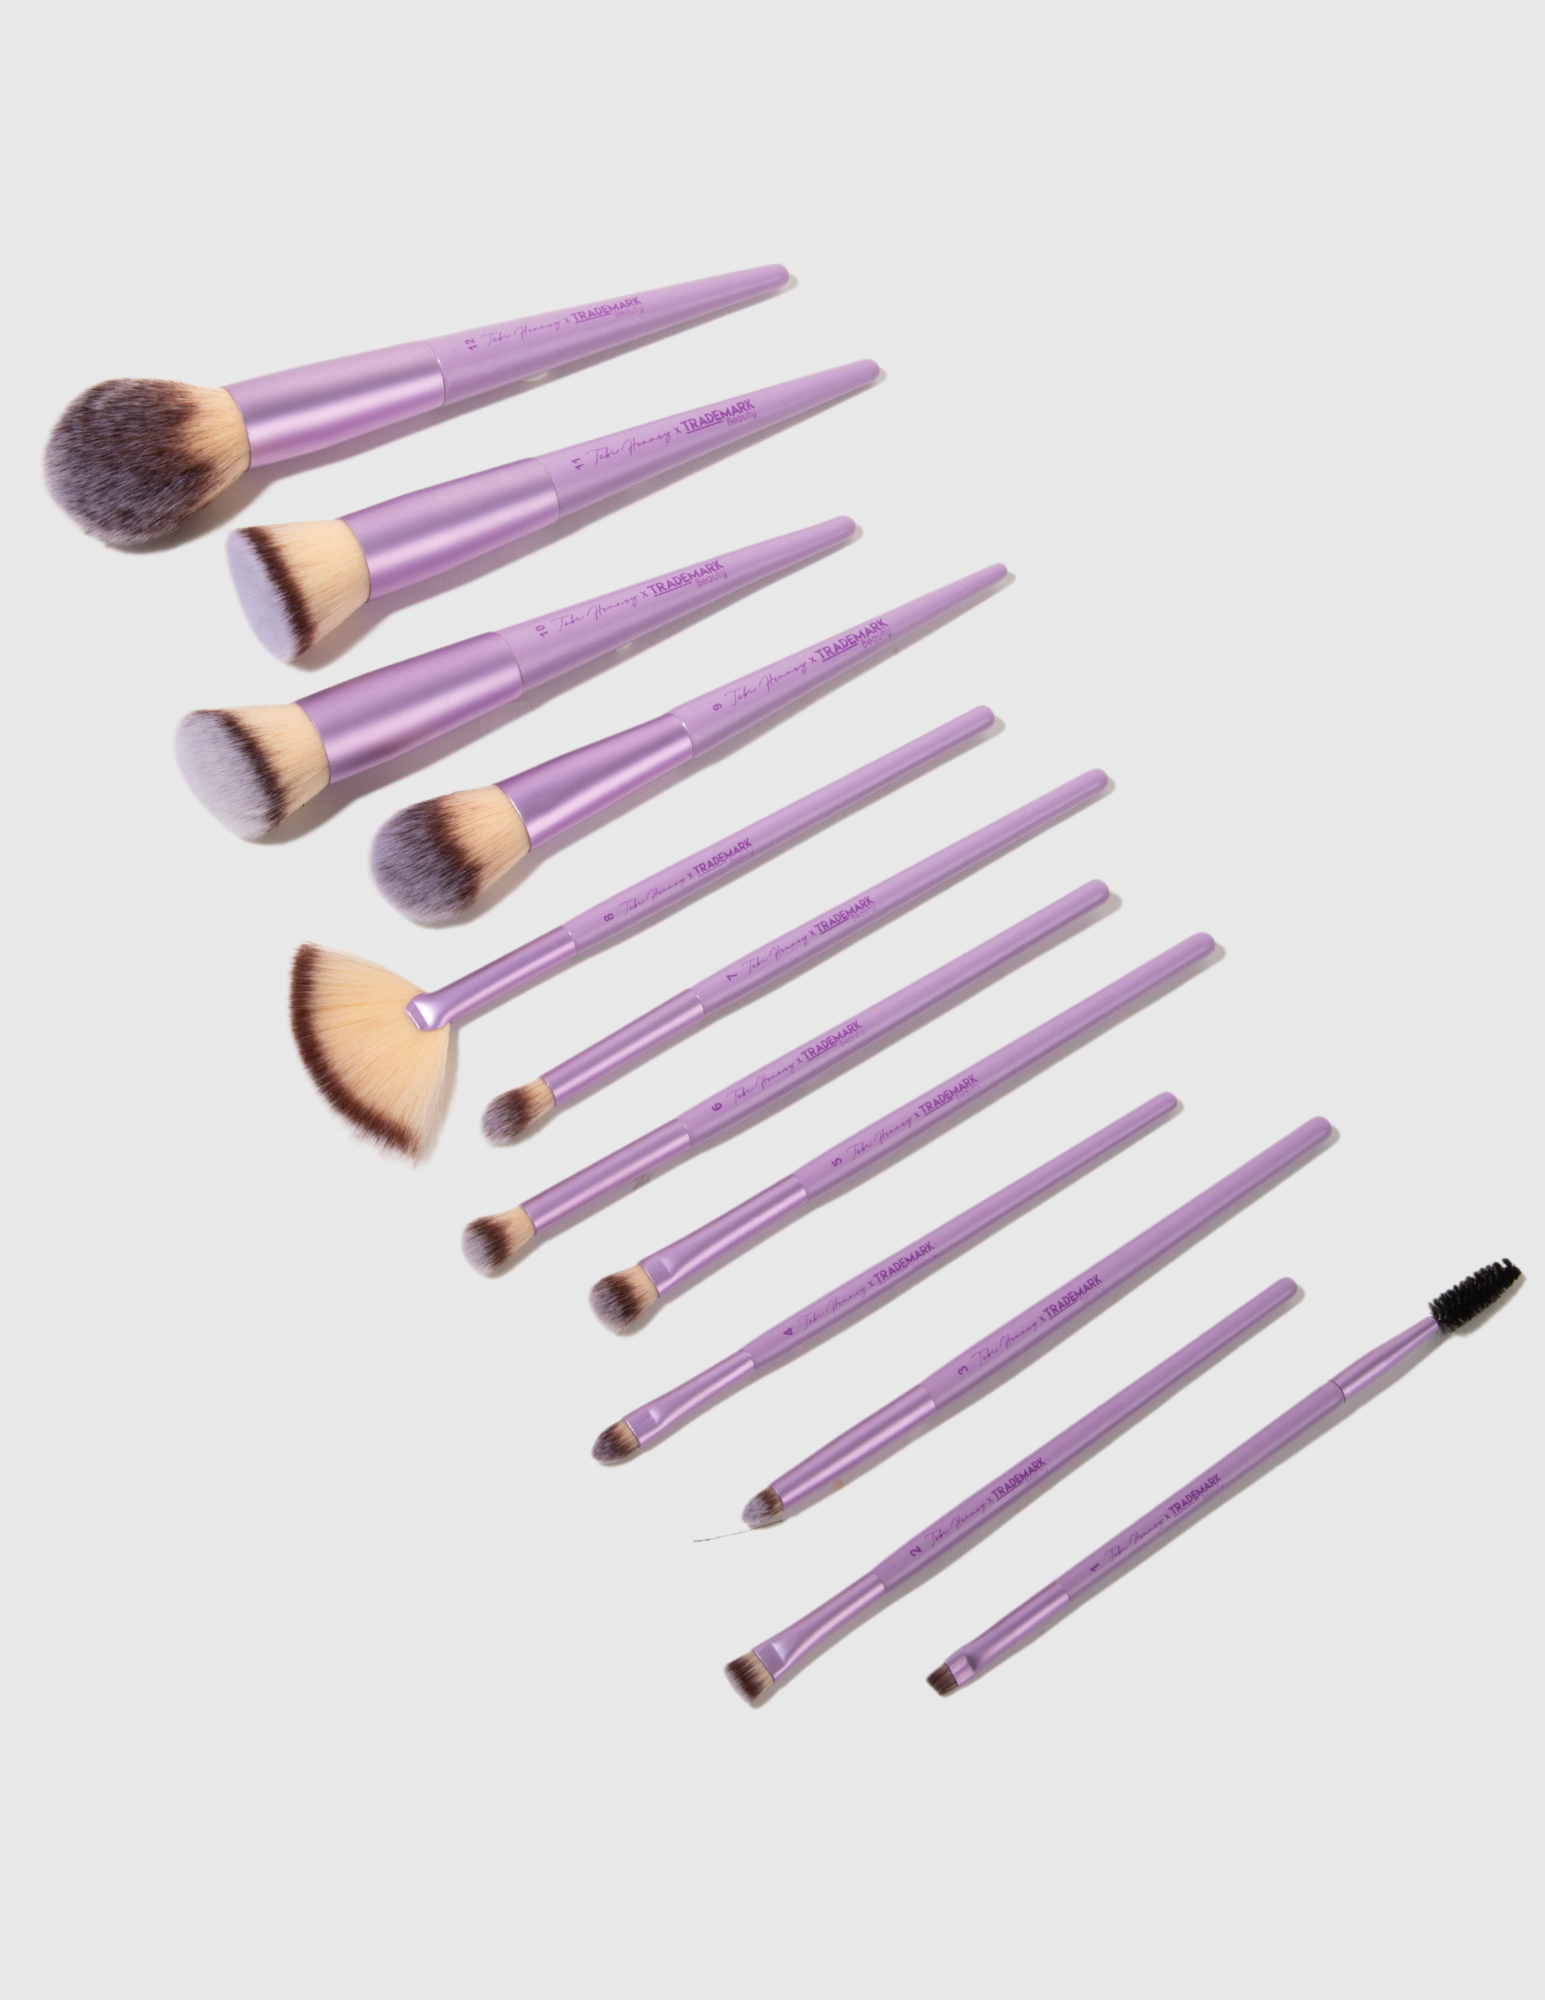 The Essentials Make-Up Brush Collection by Tobi Henney - Trademark Beauty